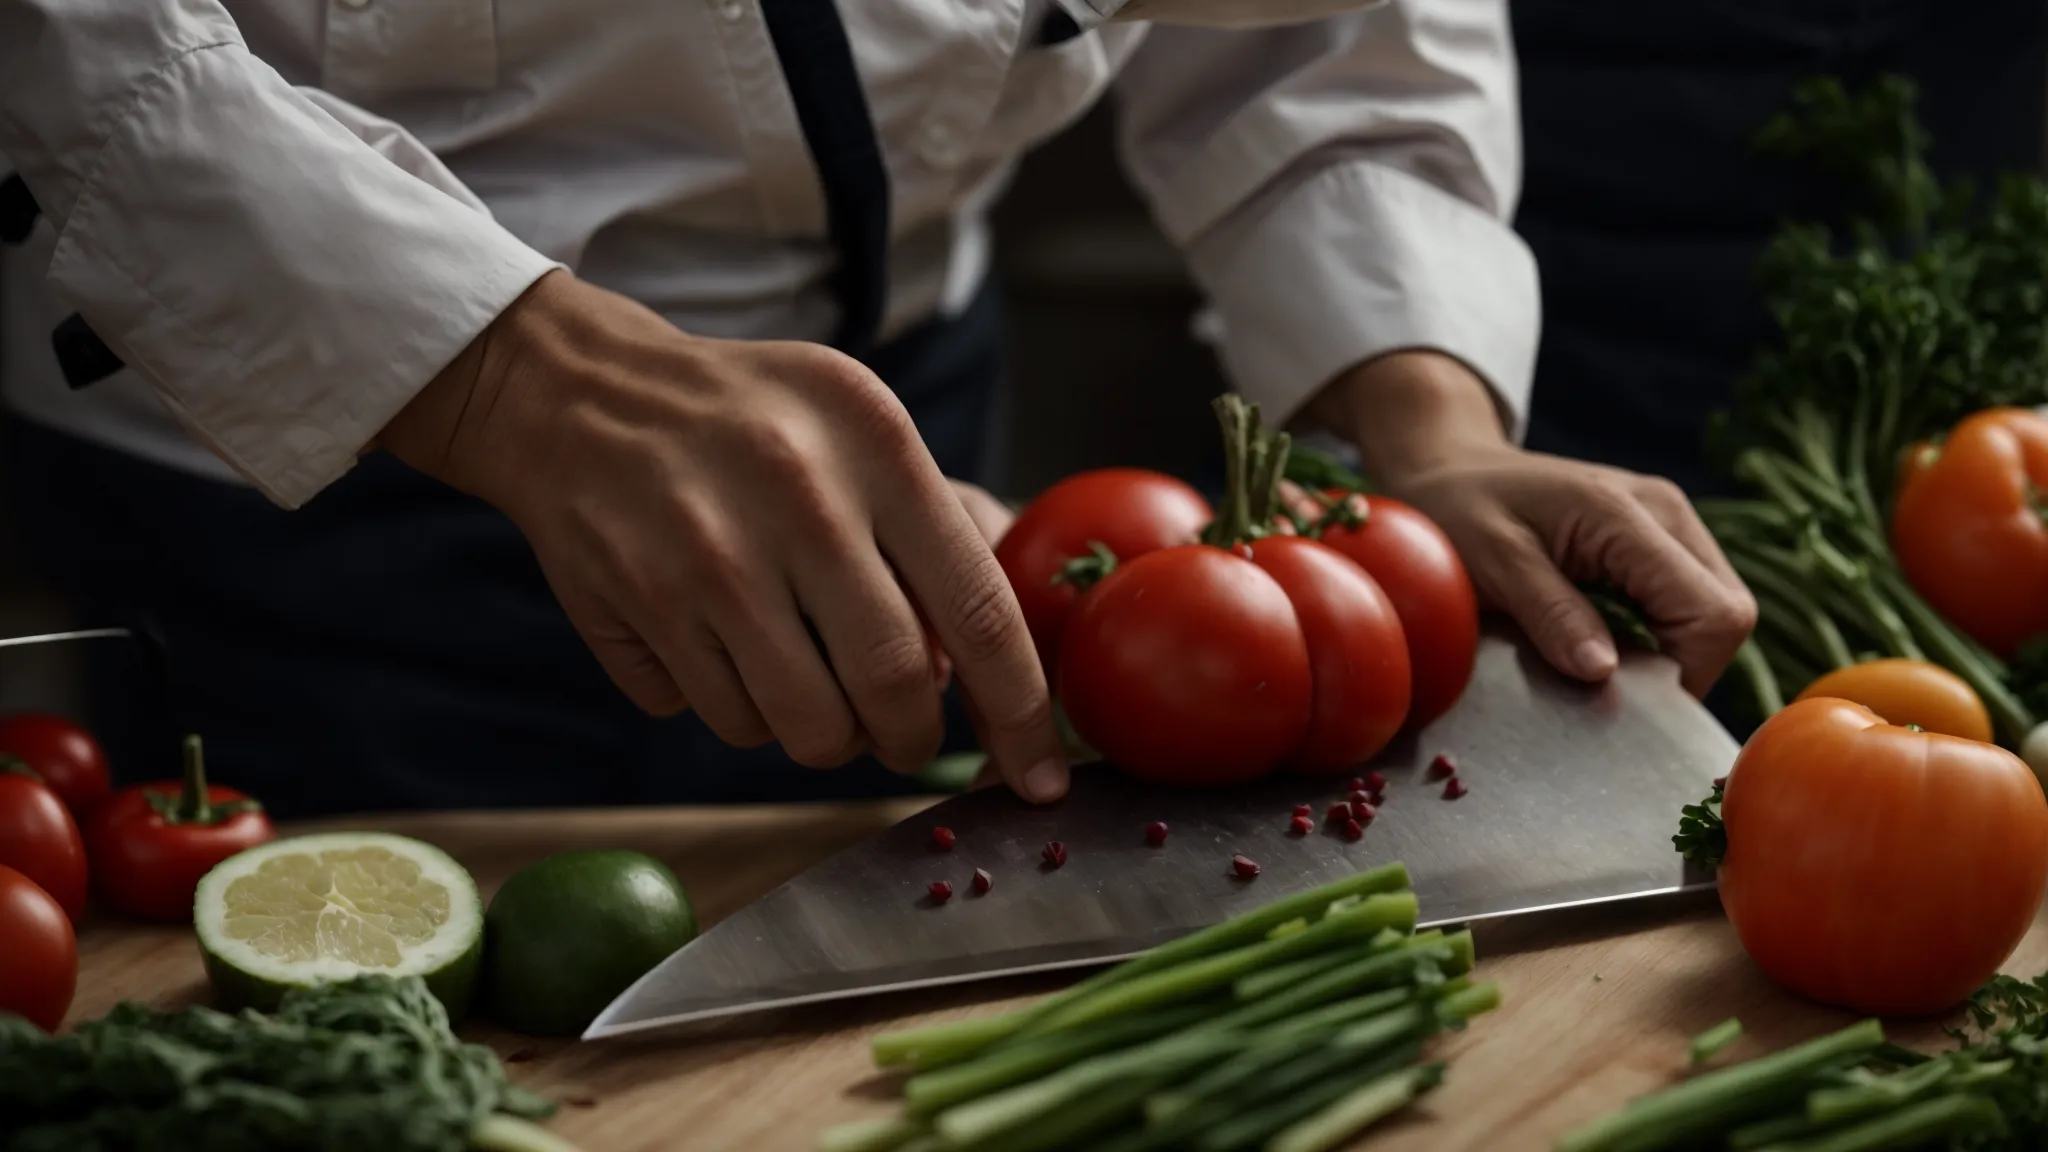 a chef holds an ergonomically designed knife above an anti-microbial cutting board, ready to slice vegetables.